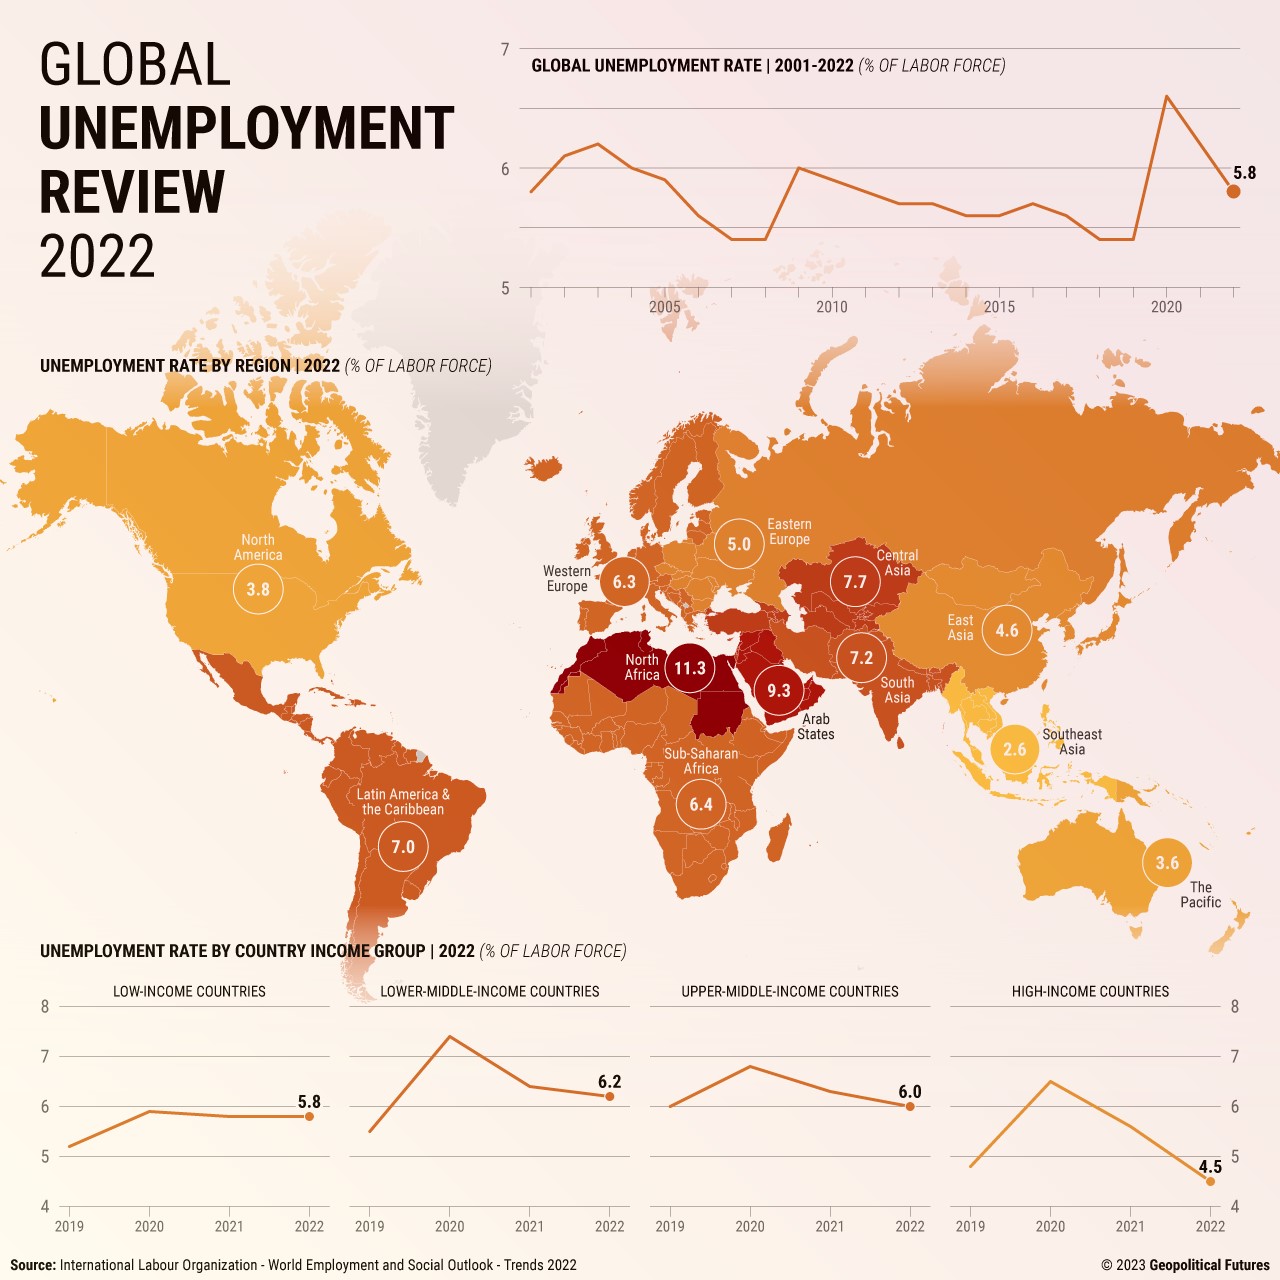 Global Unemployment Review 2022